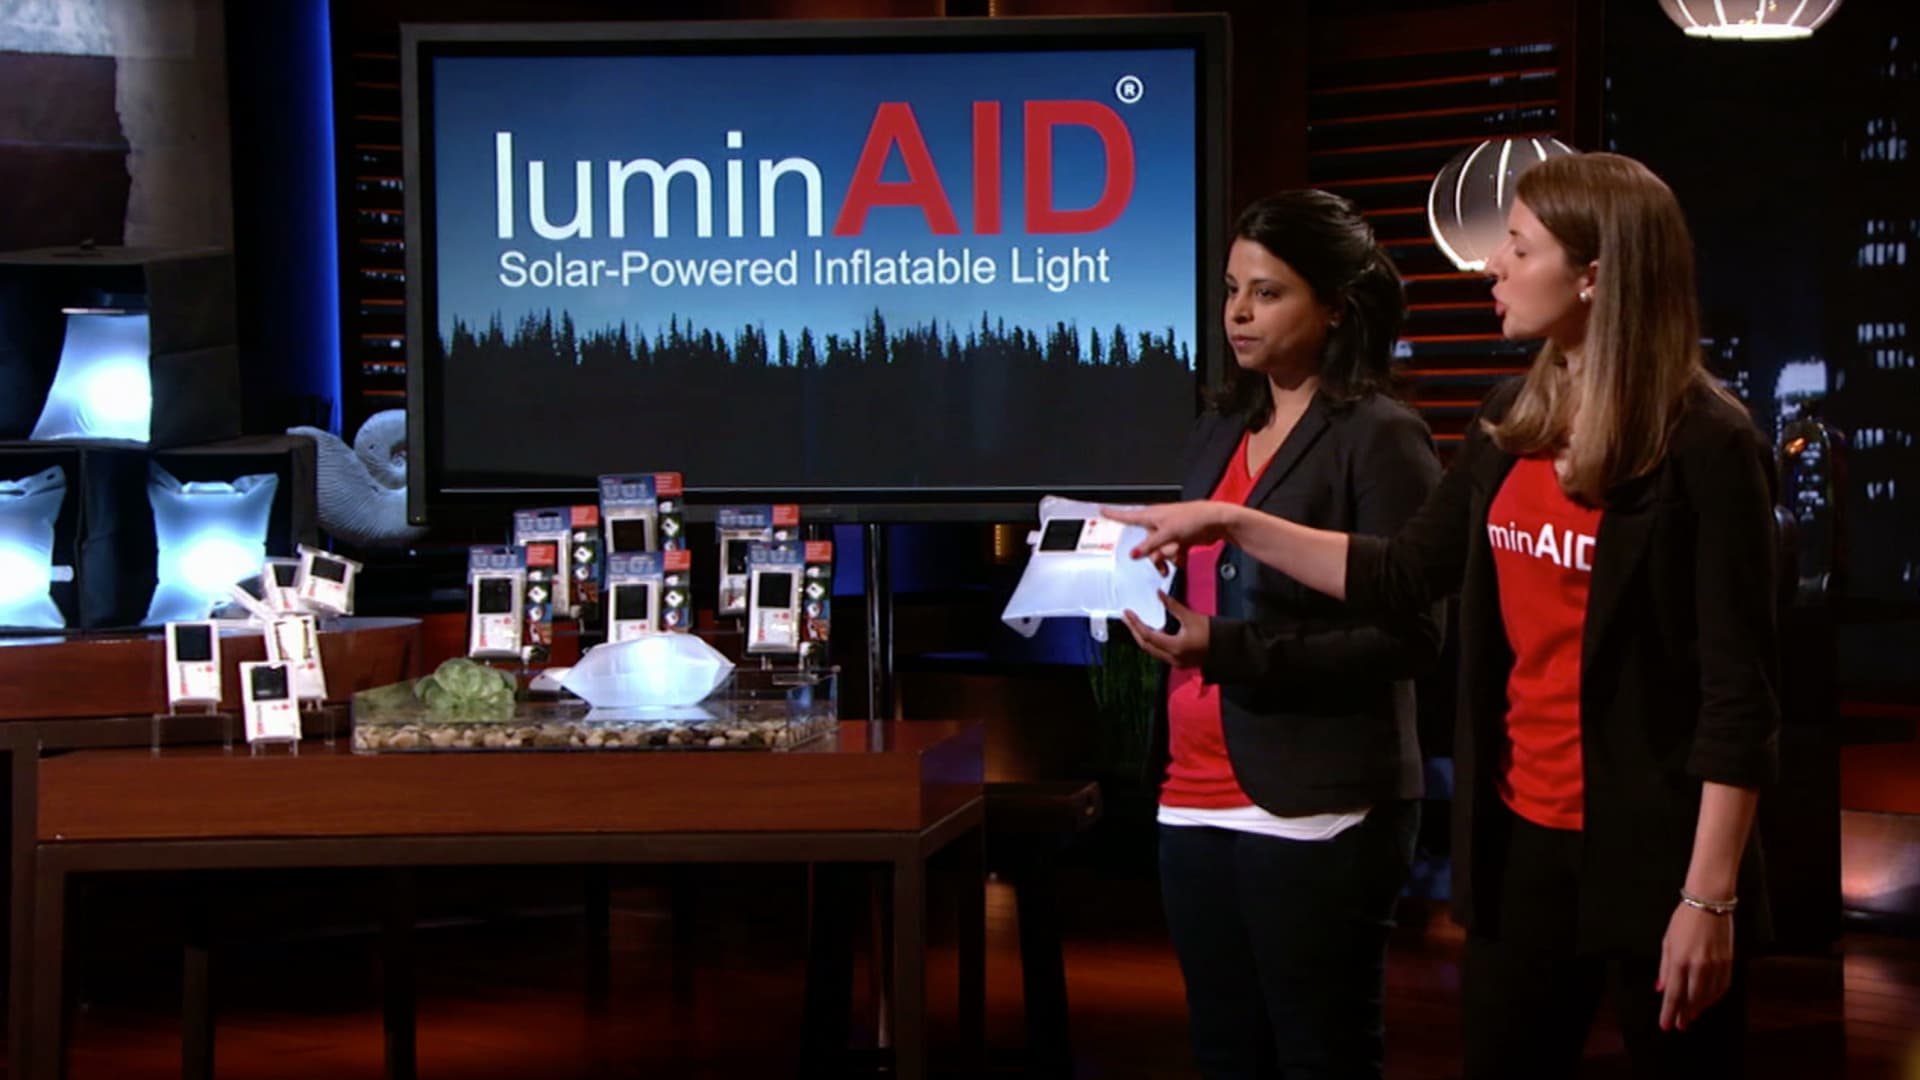 Recent Articles on Disaster Relief, Camping, and More - LuminAID